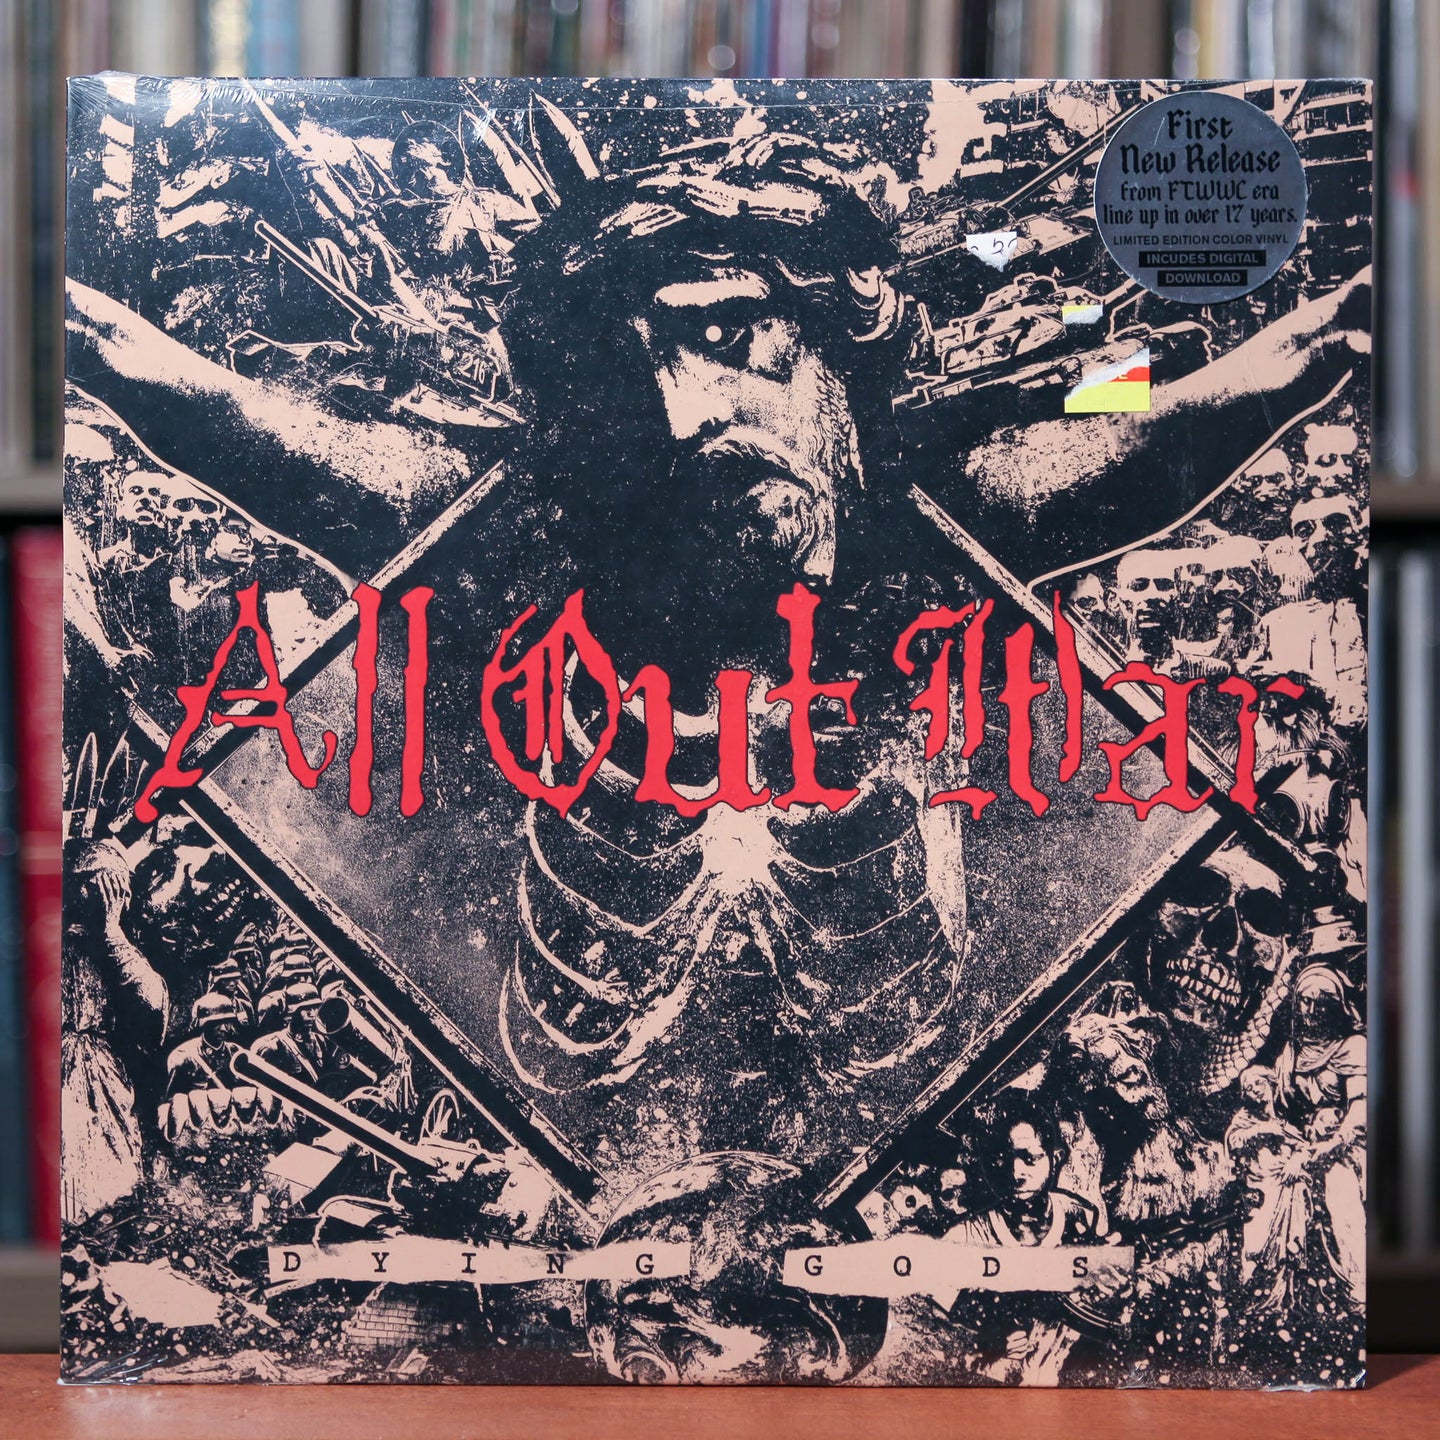 All Out War - Dying Gods - 2015 Organized Crime Records, SEALED